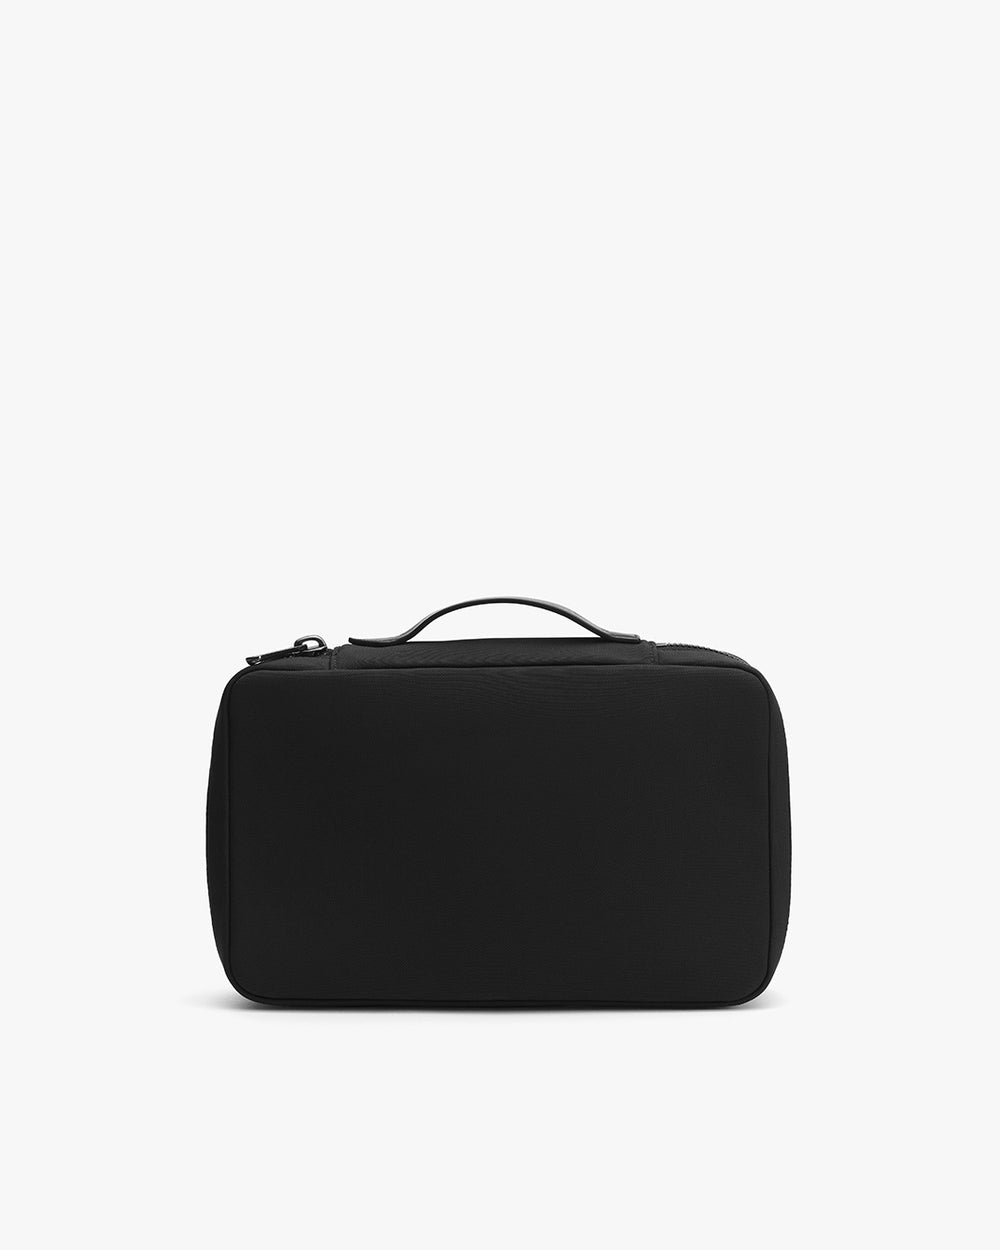 Rectangular bag with a handle on top set against a plain background.